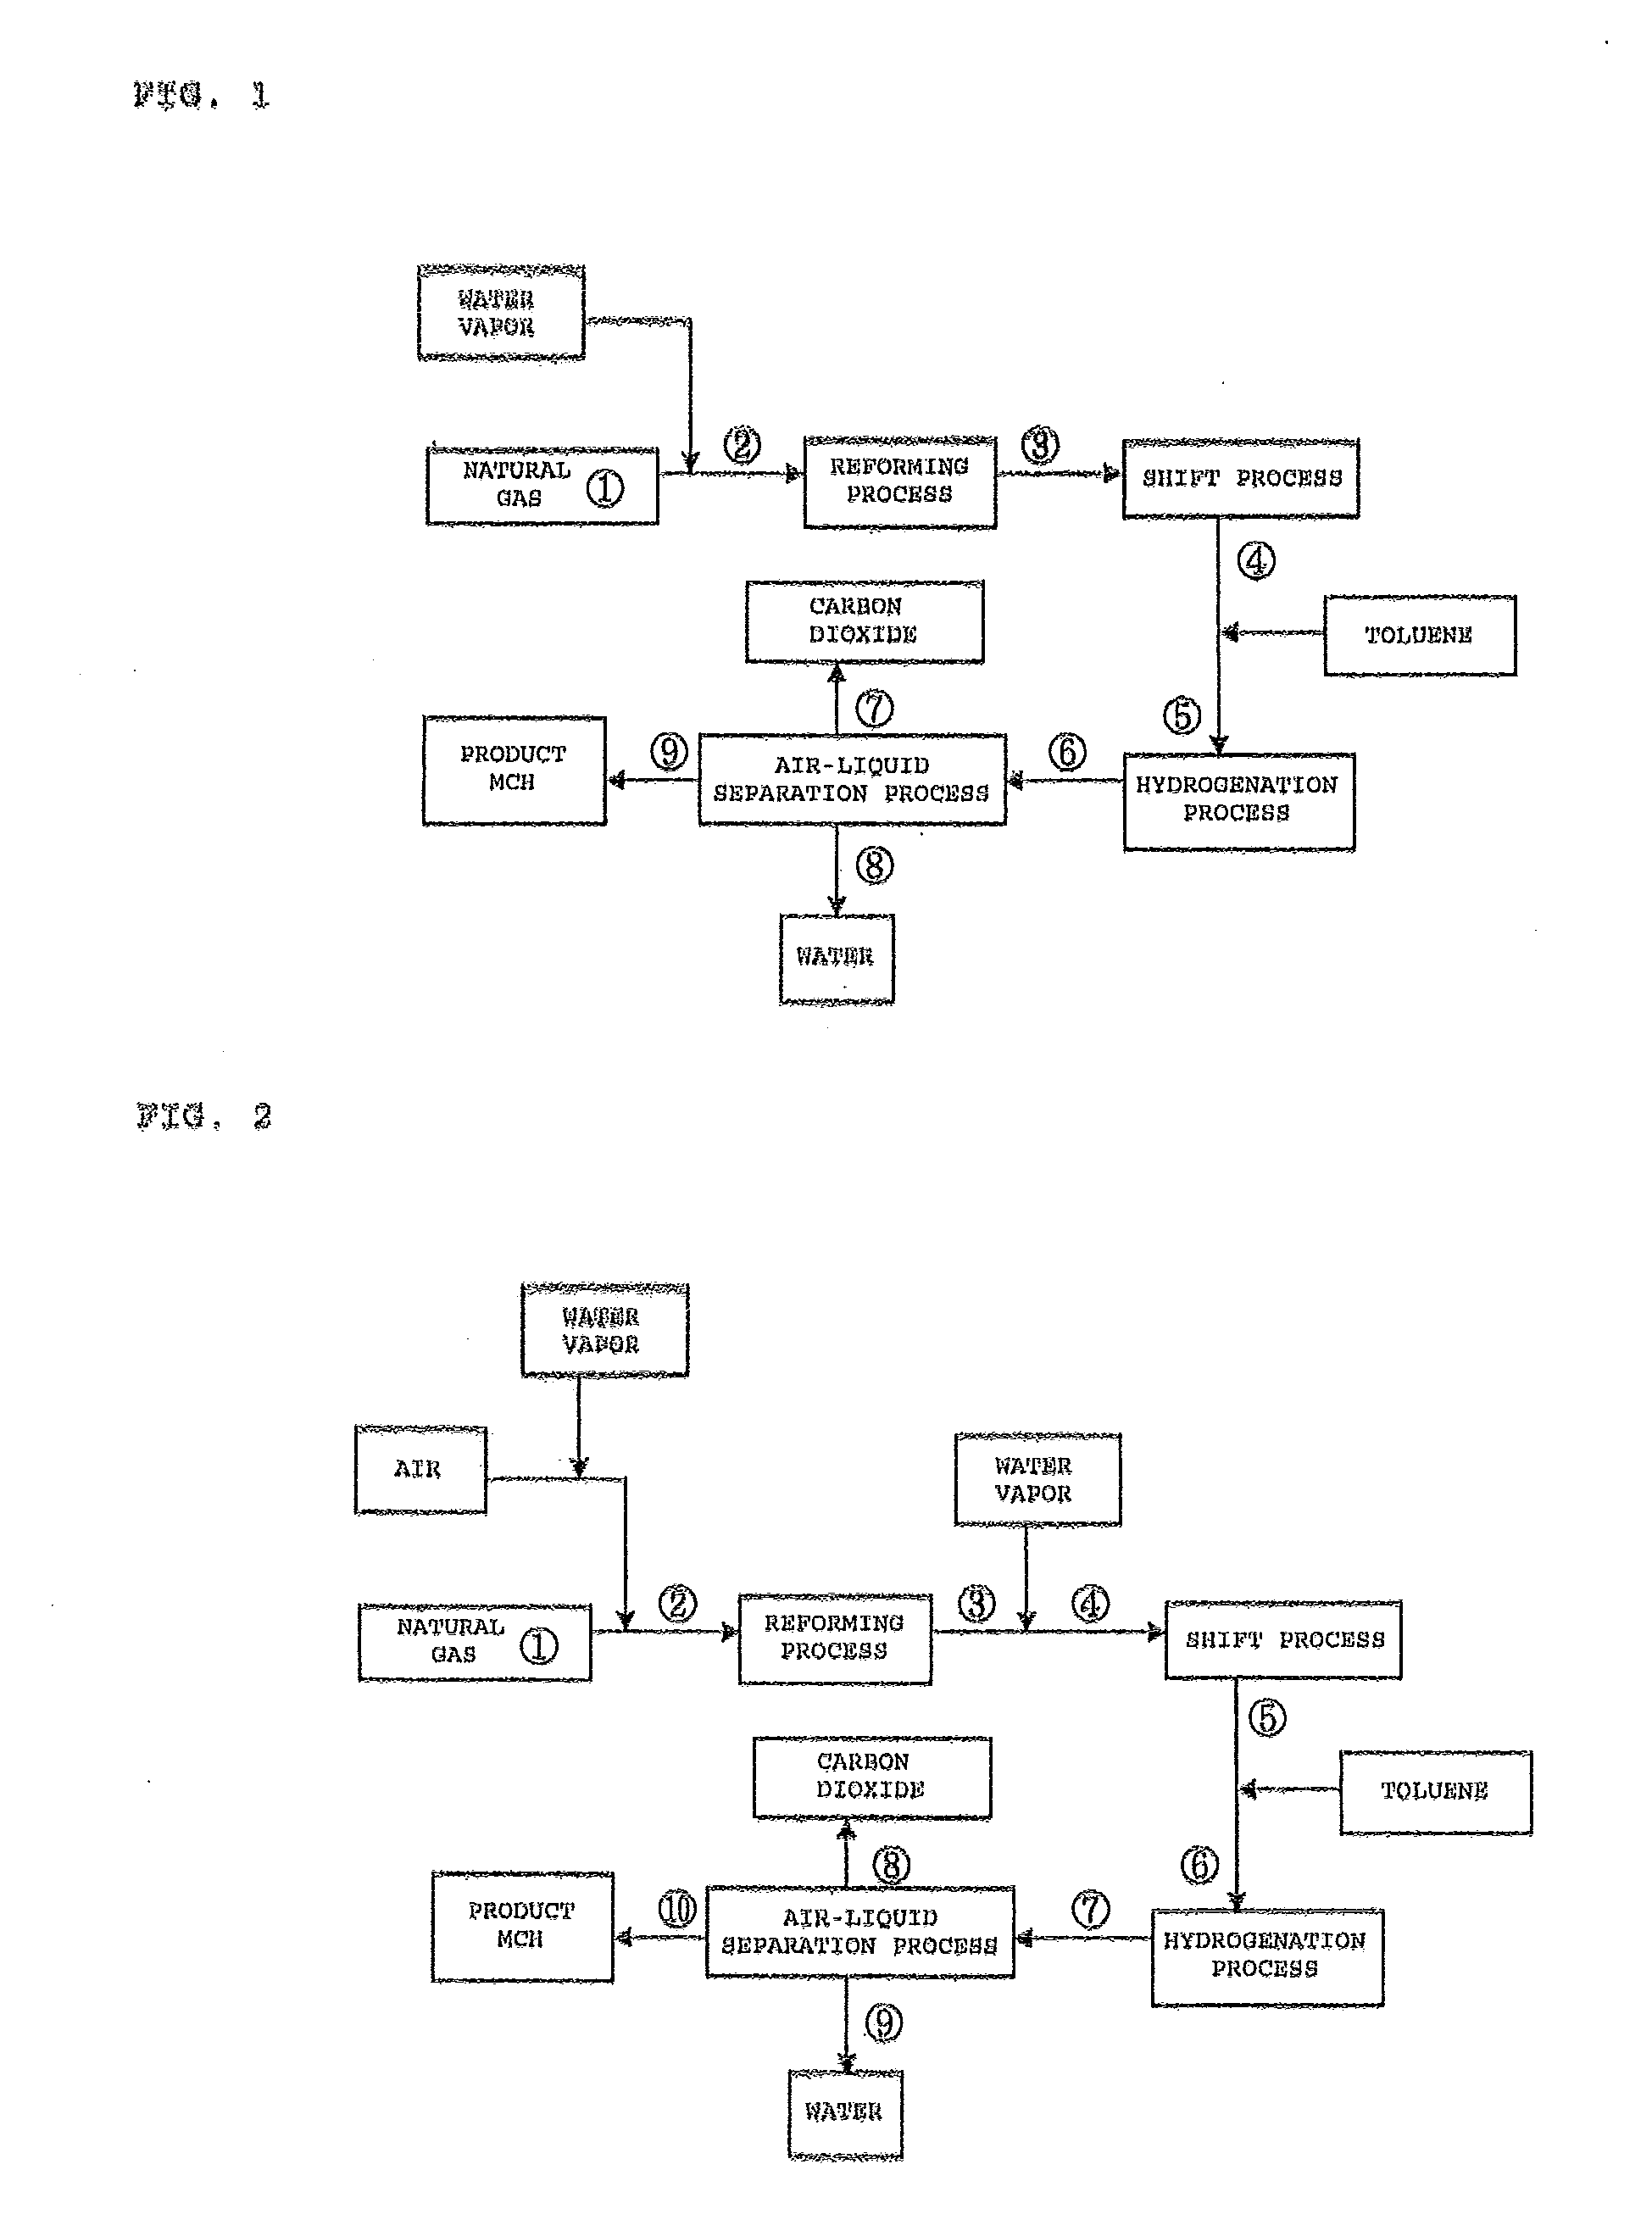 Method for producing hydrogen aimed at storage and transportation